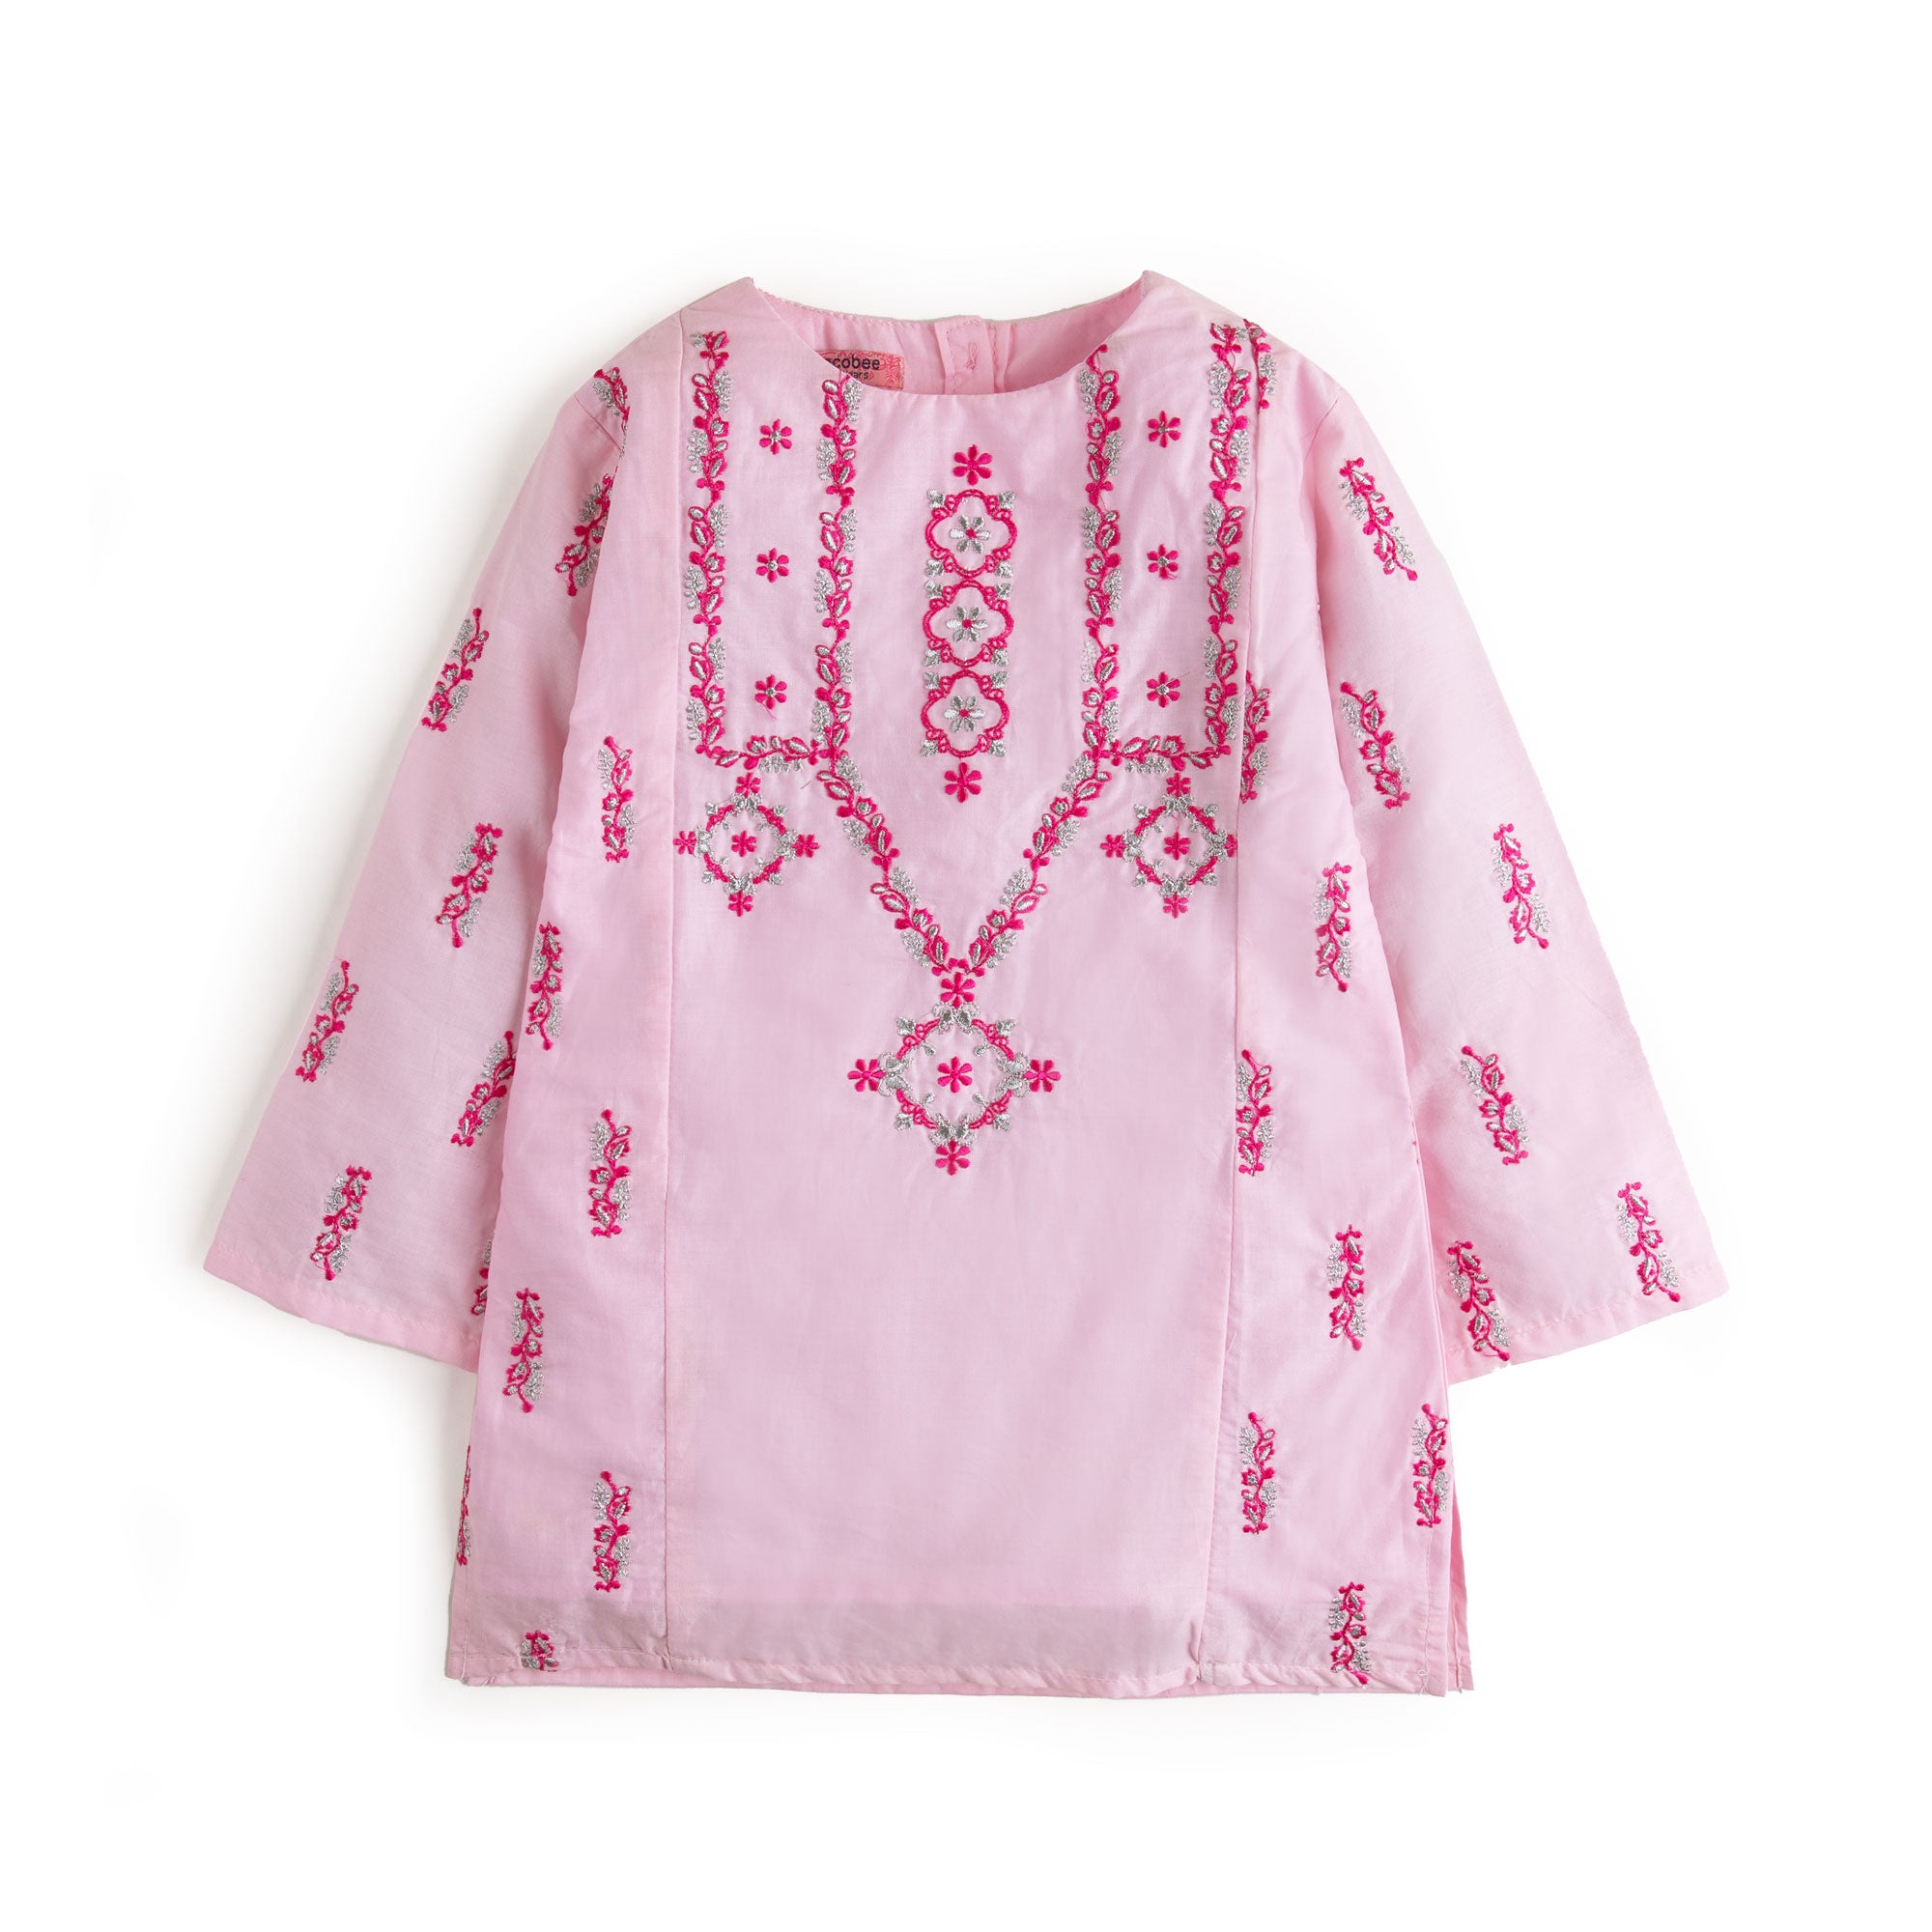 Cotton Candy Pink Embroidered Top